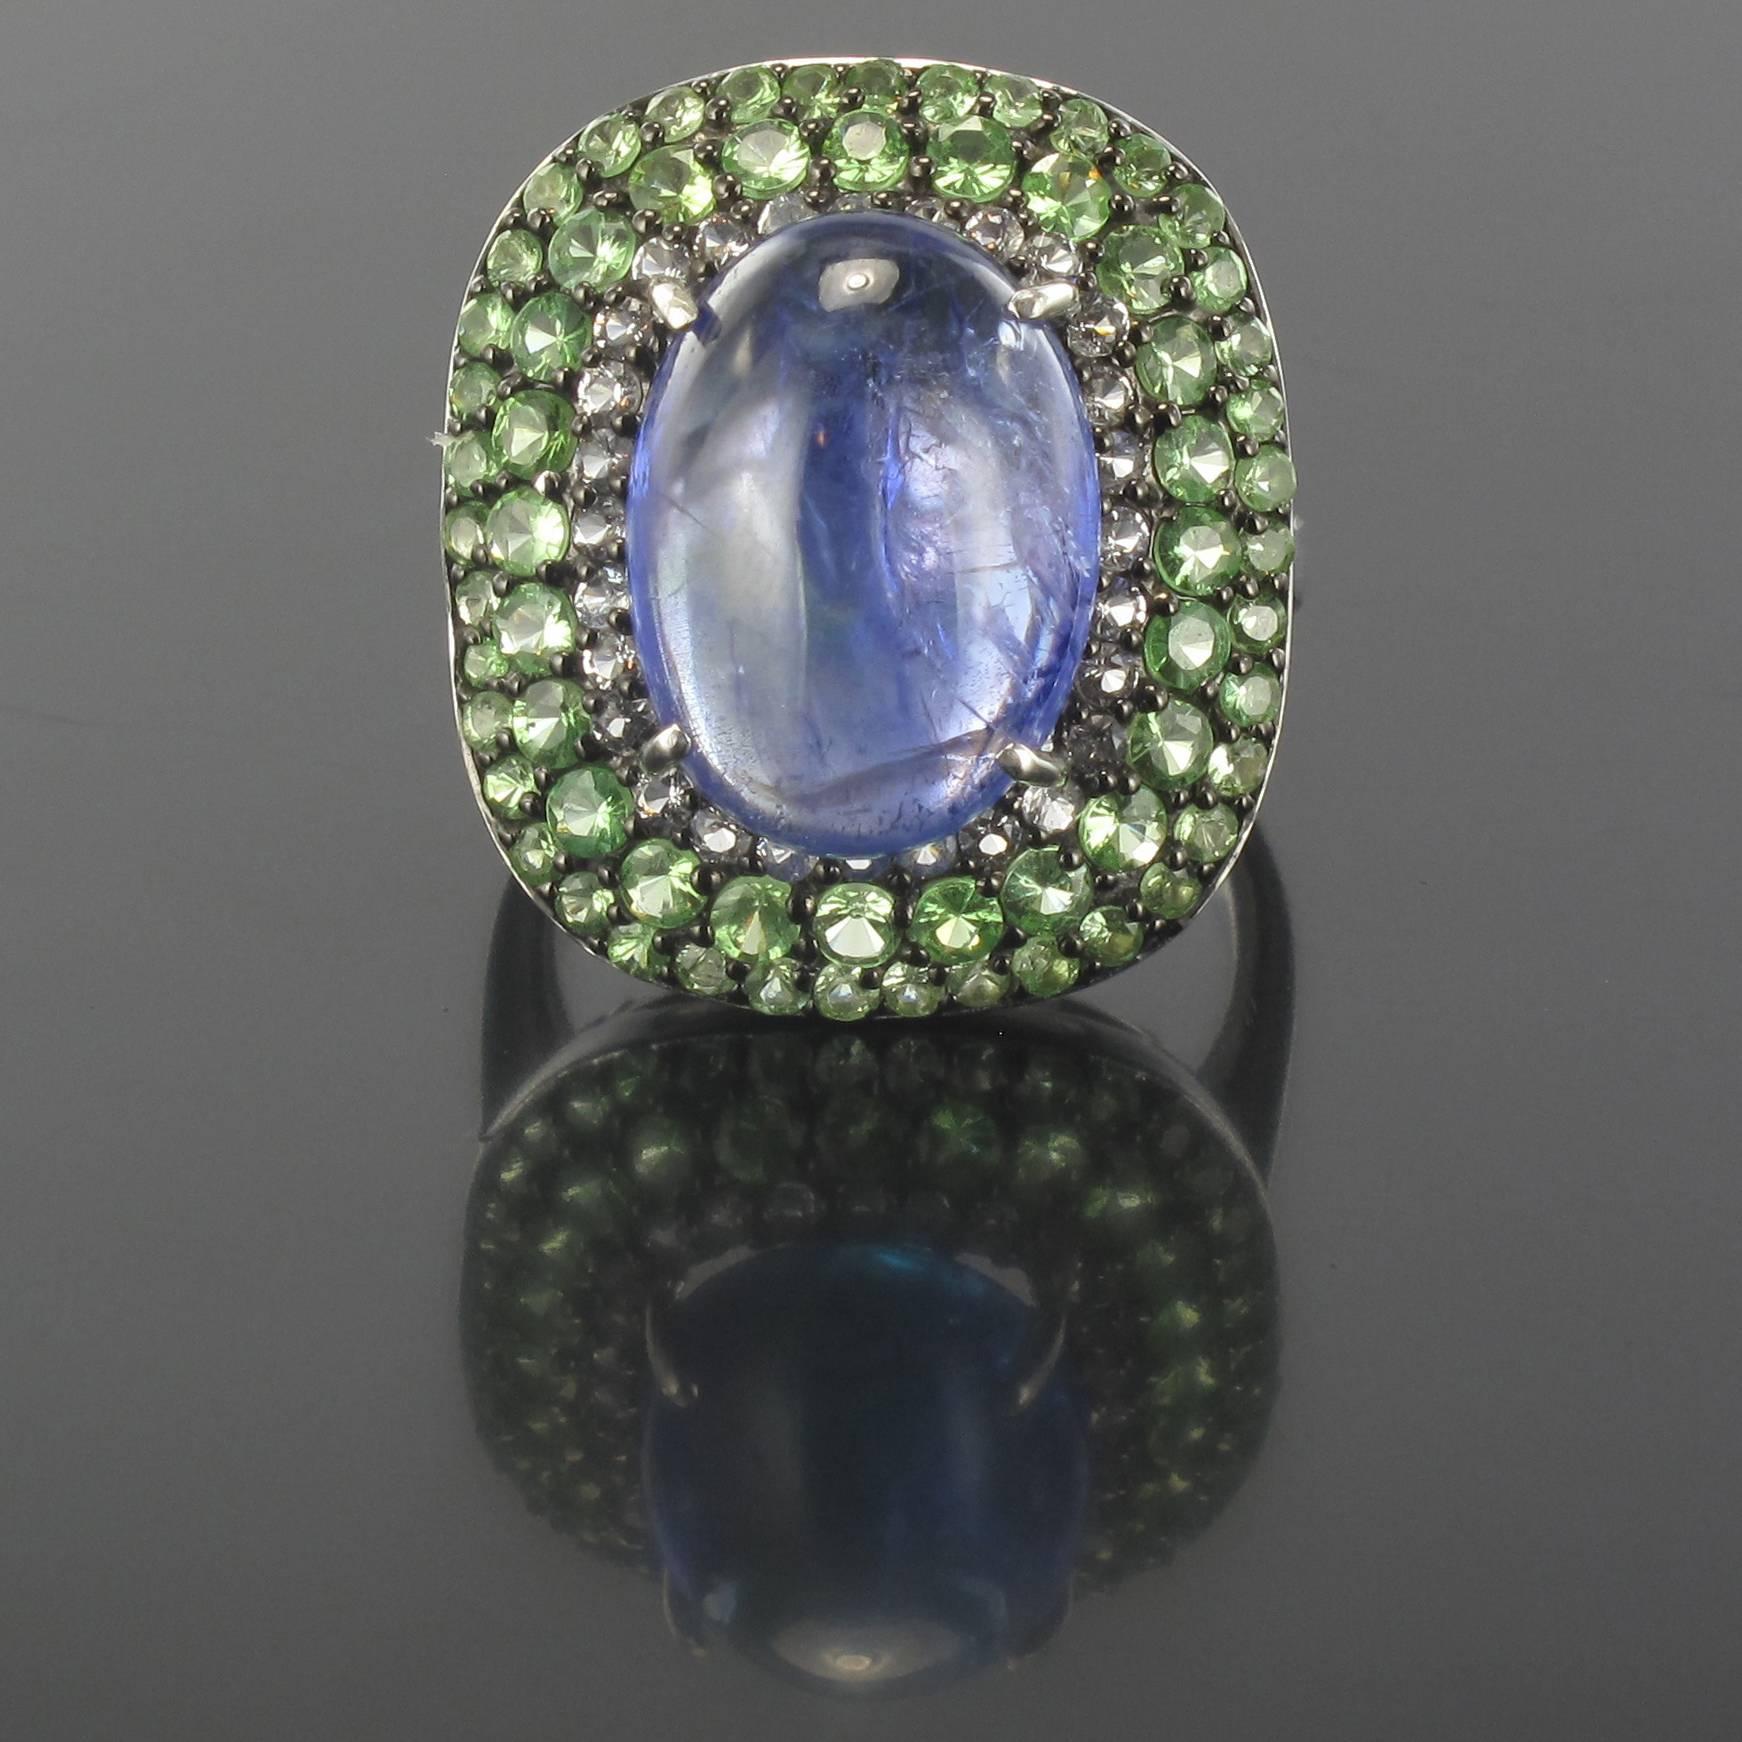 Silver Ring.

This sparkling silver ring is claw set with a Tanzanite cabochon surrounded by a double row of tsavorite green garnets and a row of white topazes. The bed of this tanzanite ring is openwork to allow light to enter beneath the